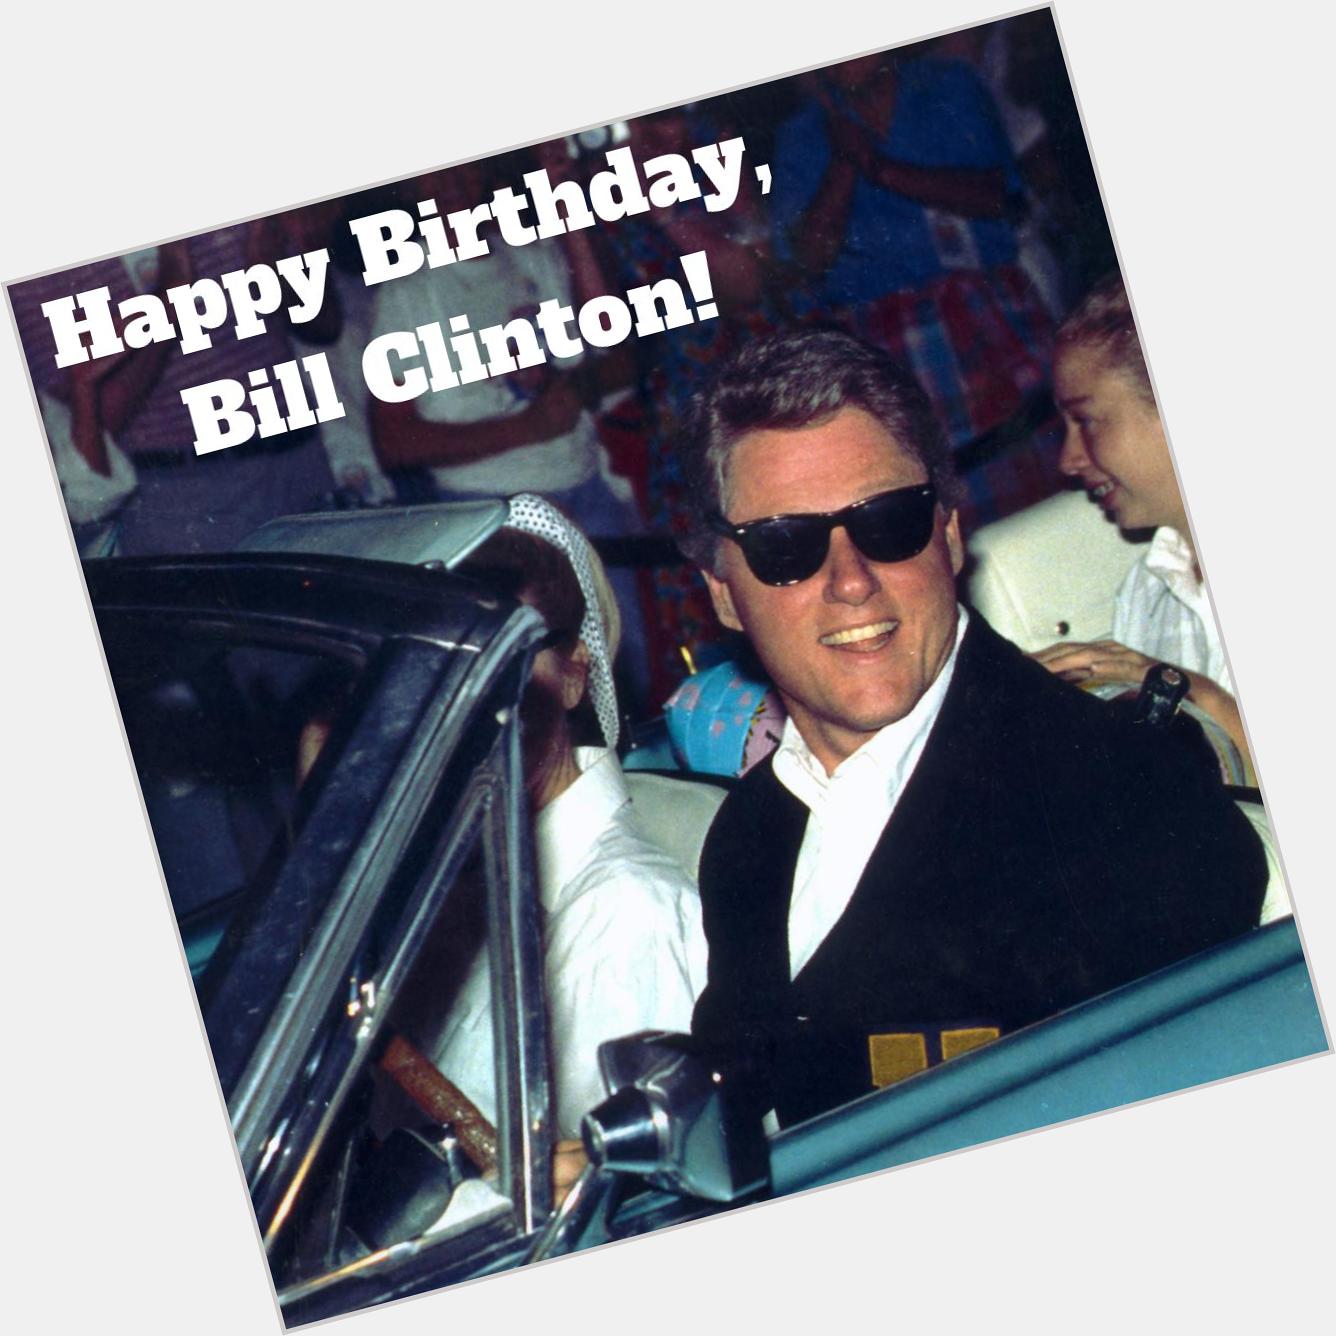 ON THIS DAY: Happy Birthday to former President Bill Clinton - 73 years old today. 